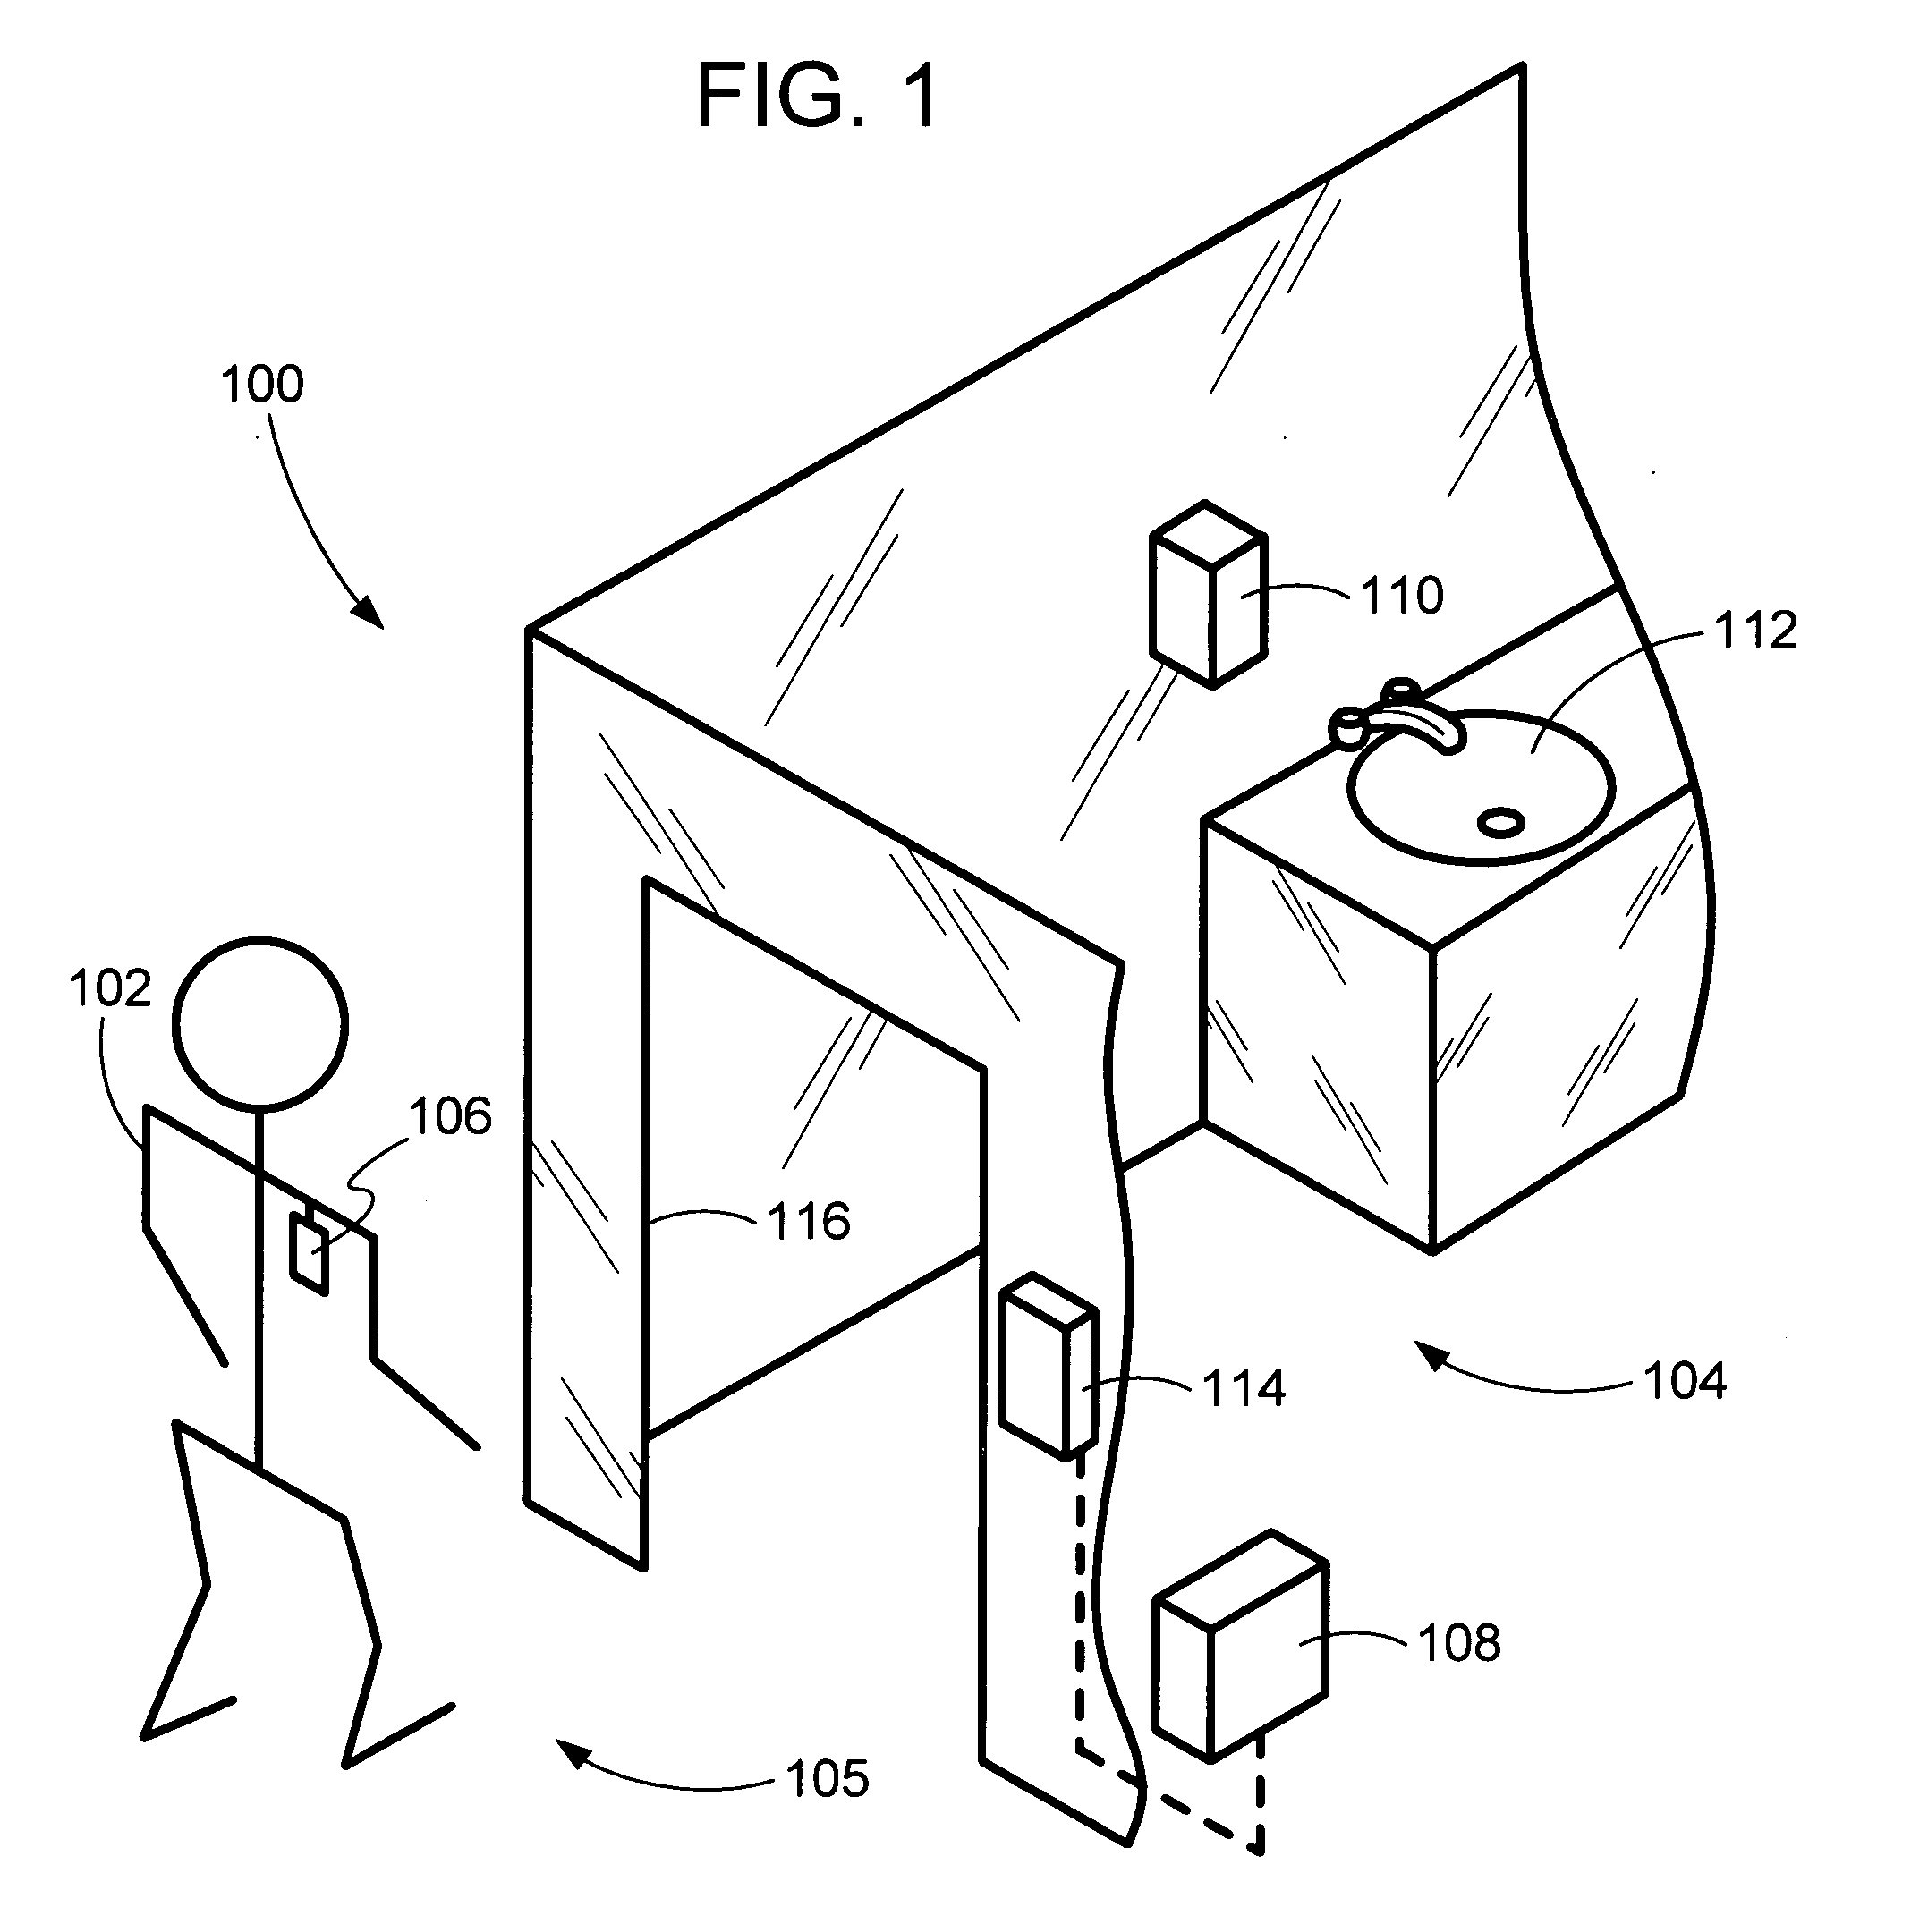 System and method for detecting proper cleaning of people and items entering a controlled area